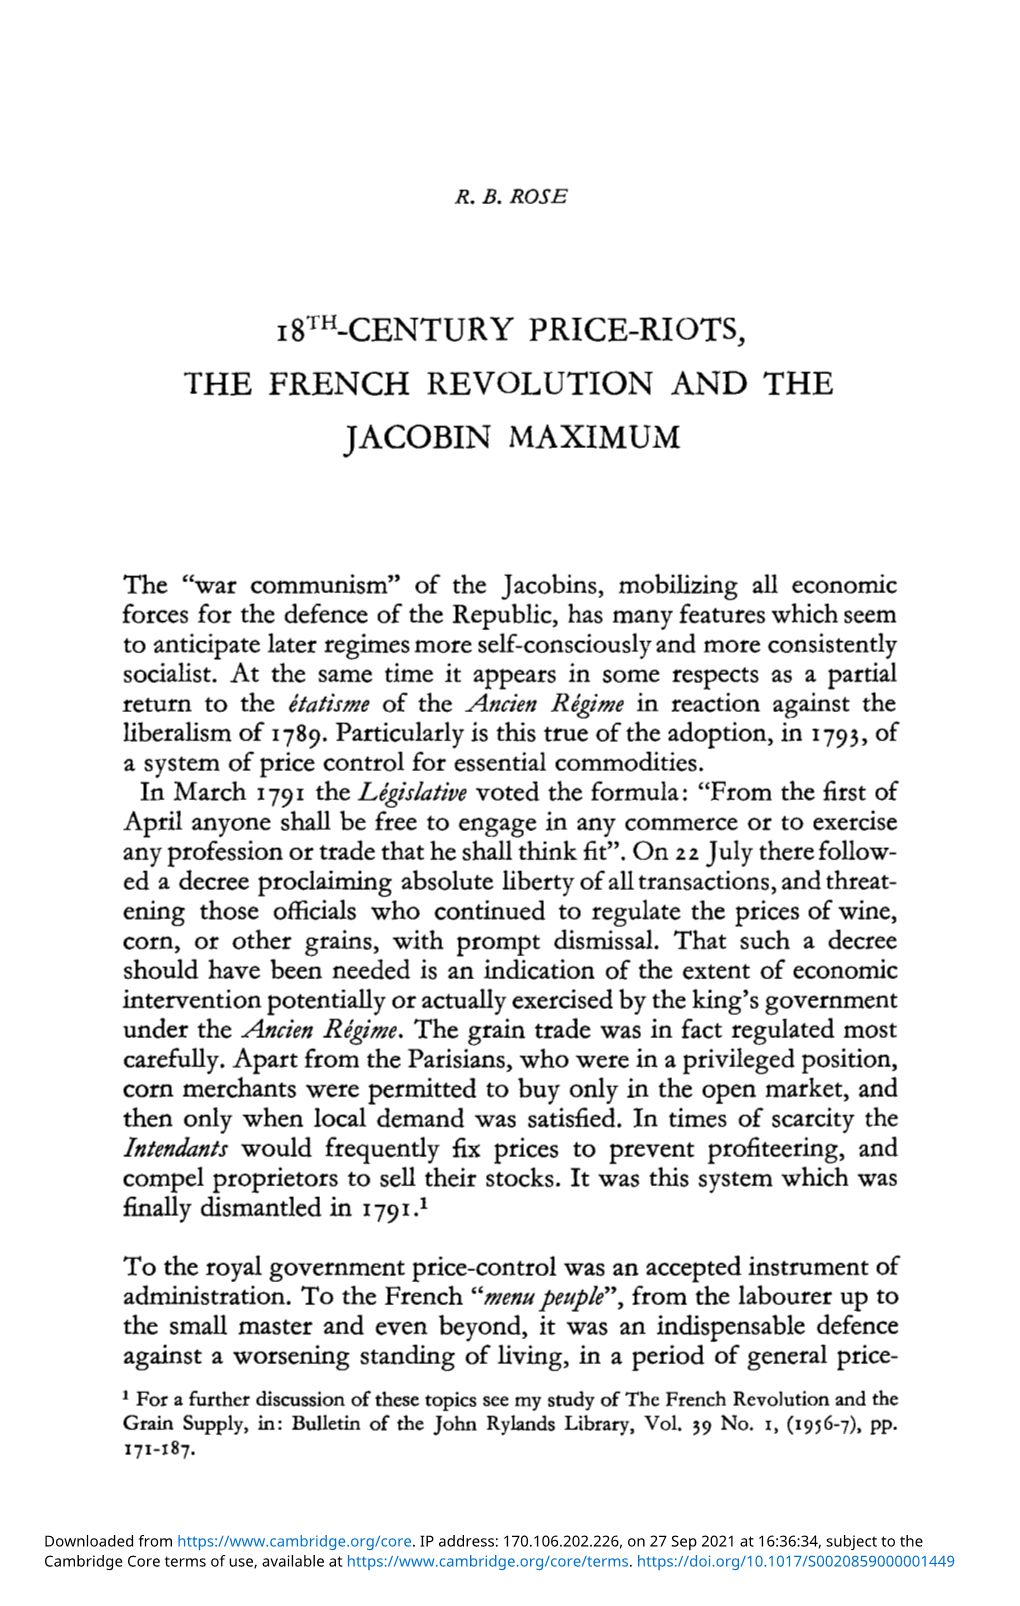 18Th-Century Price-Riots, the French Revolution and the Jacobin Maximum